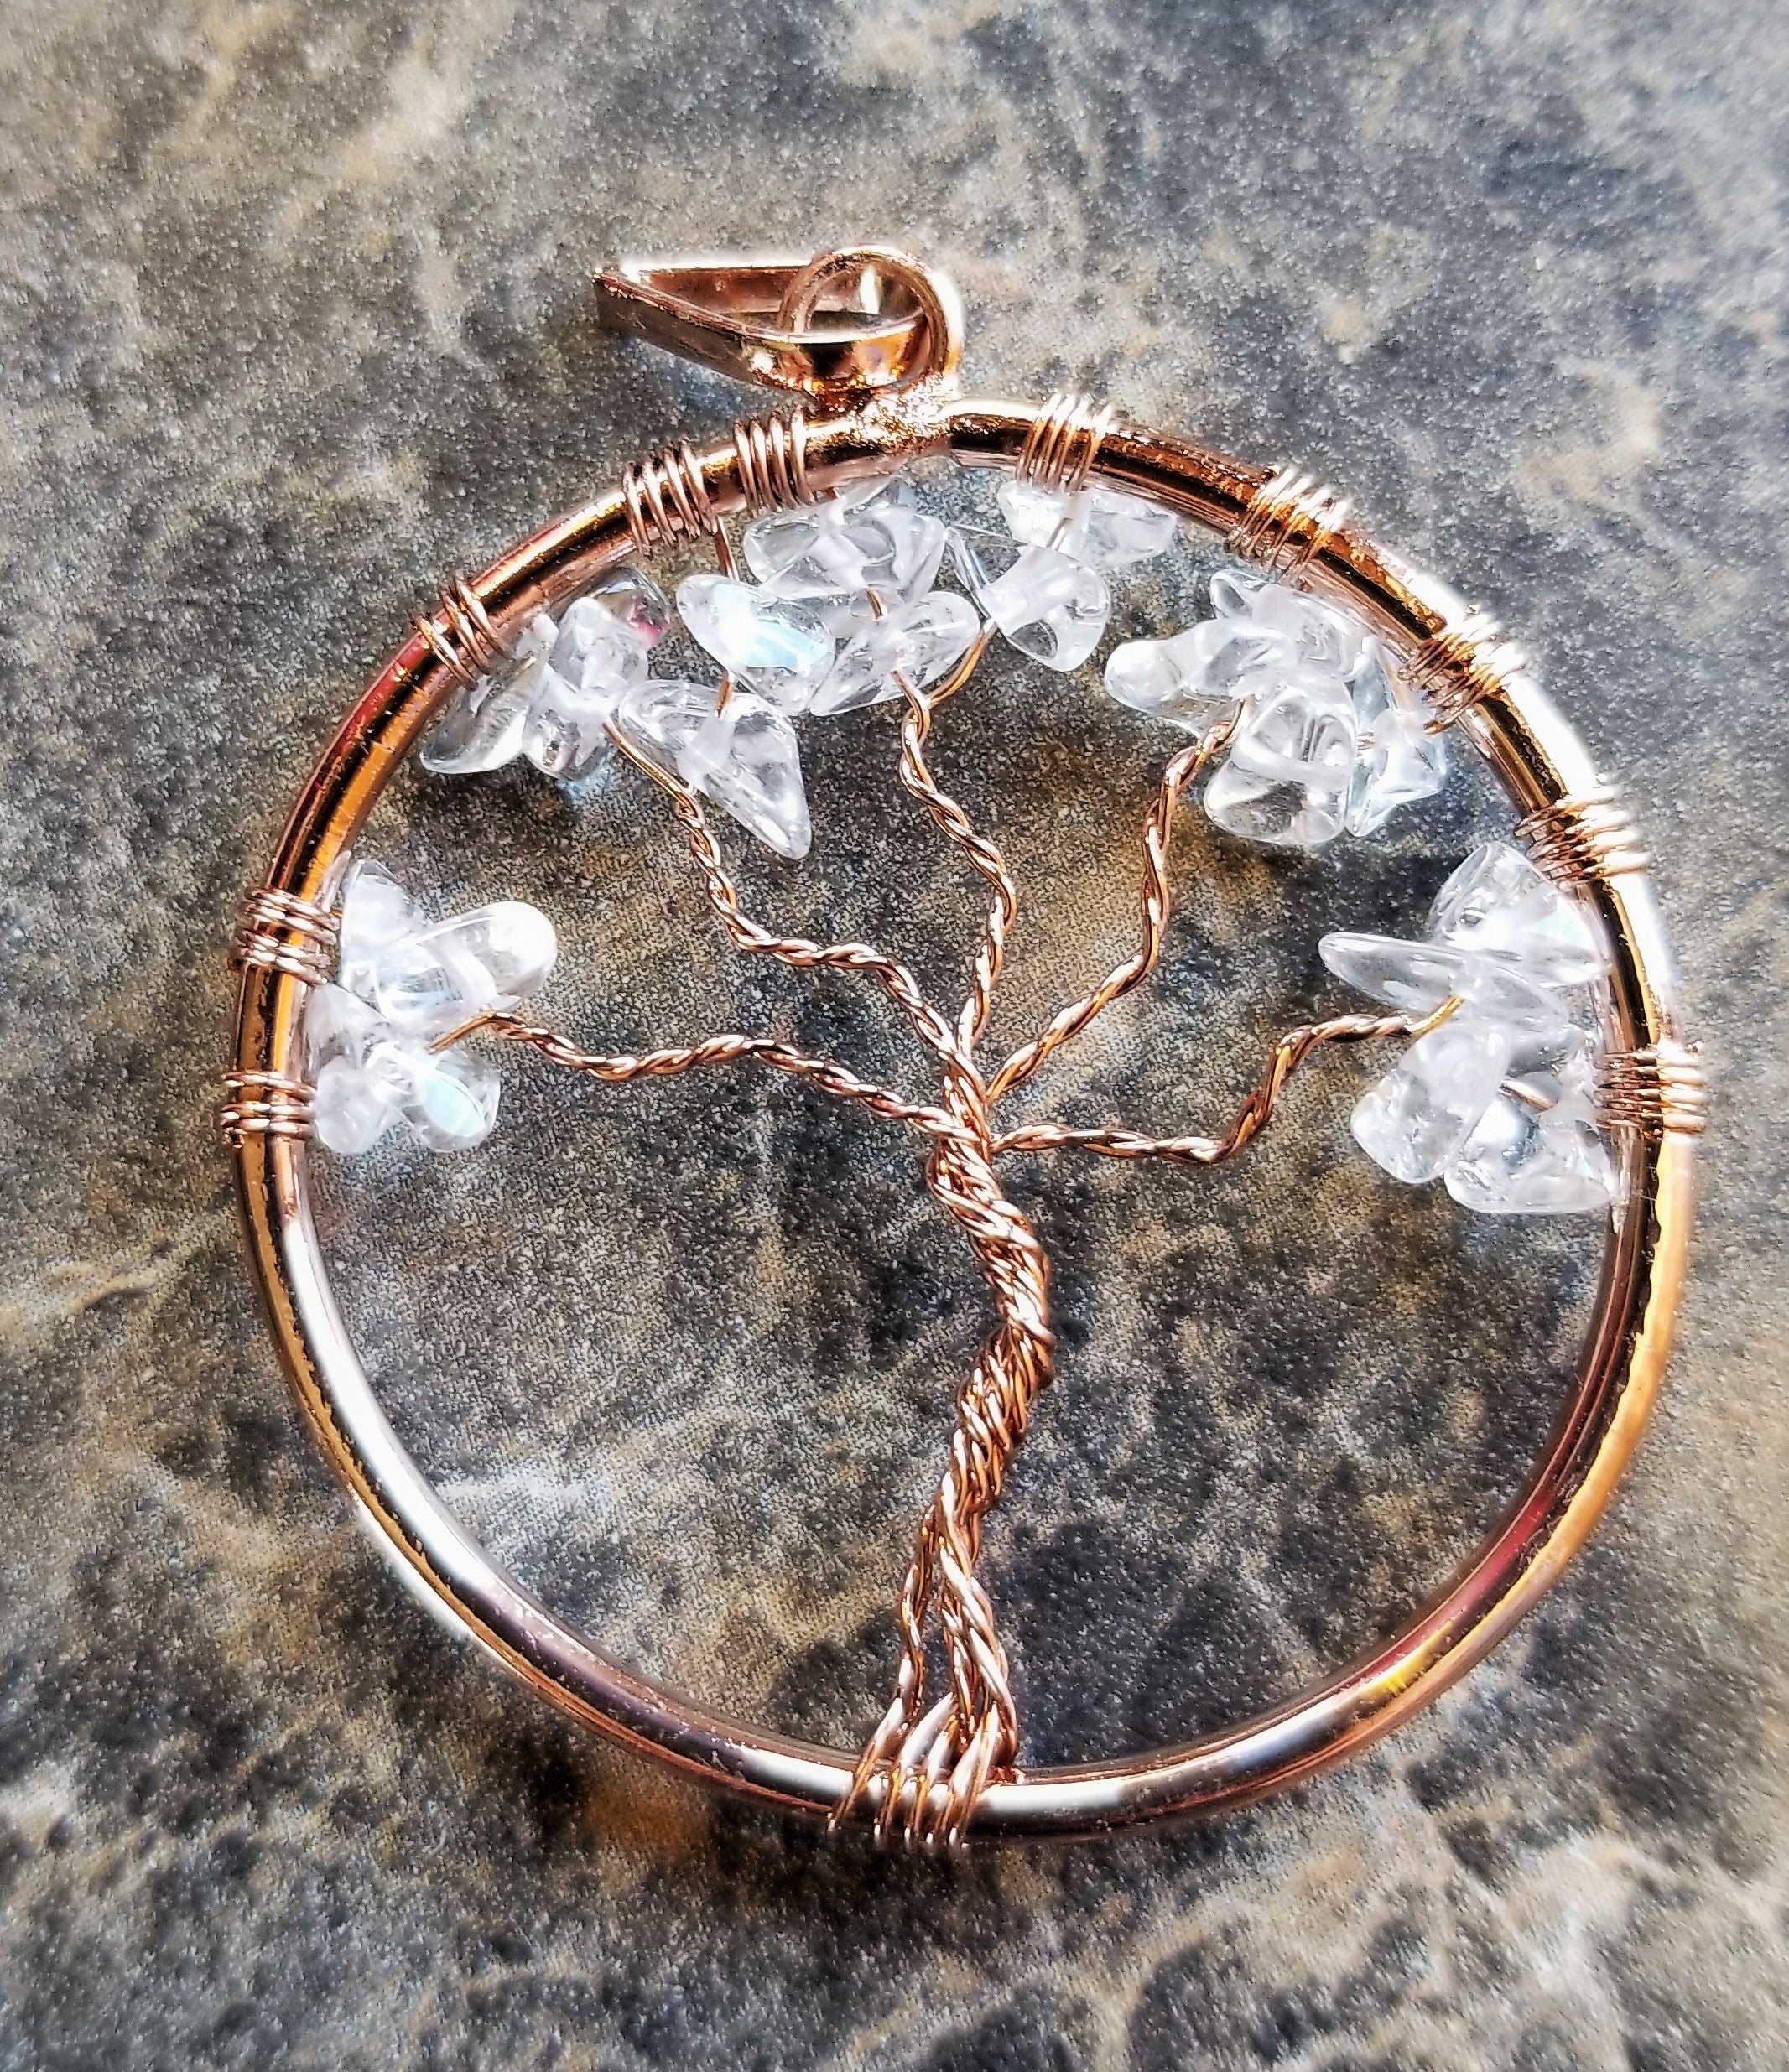 Stunning Tree of Life Pendant Necklace with Crystal Quartz Stones Rose Gold or Antique Silver Active